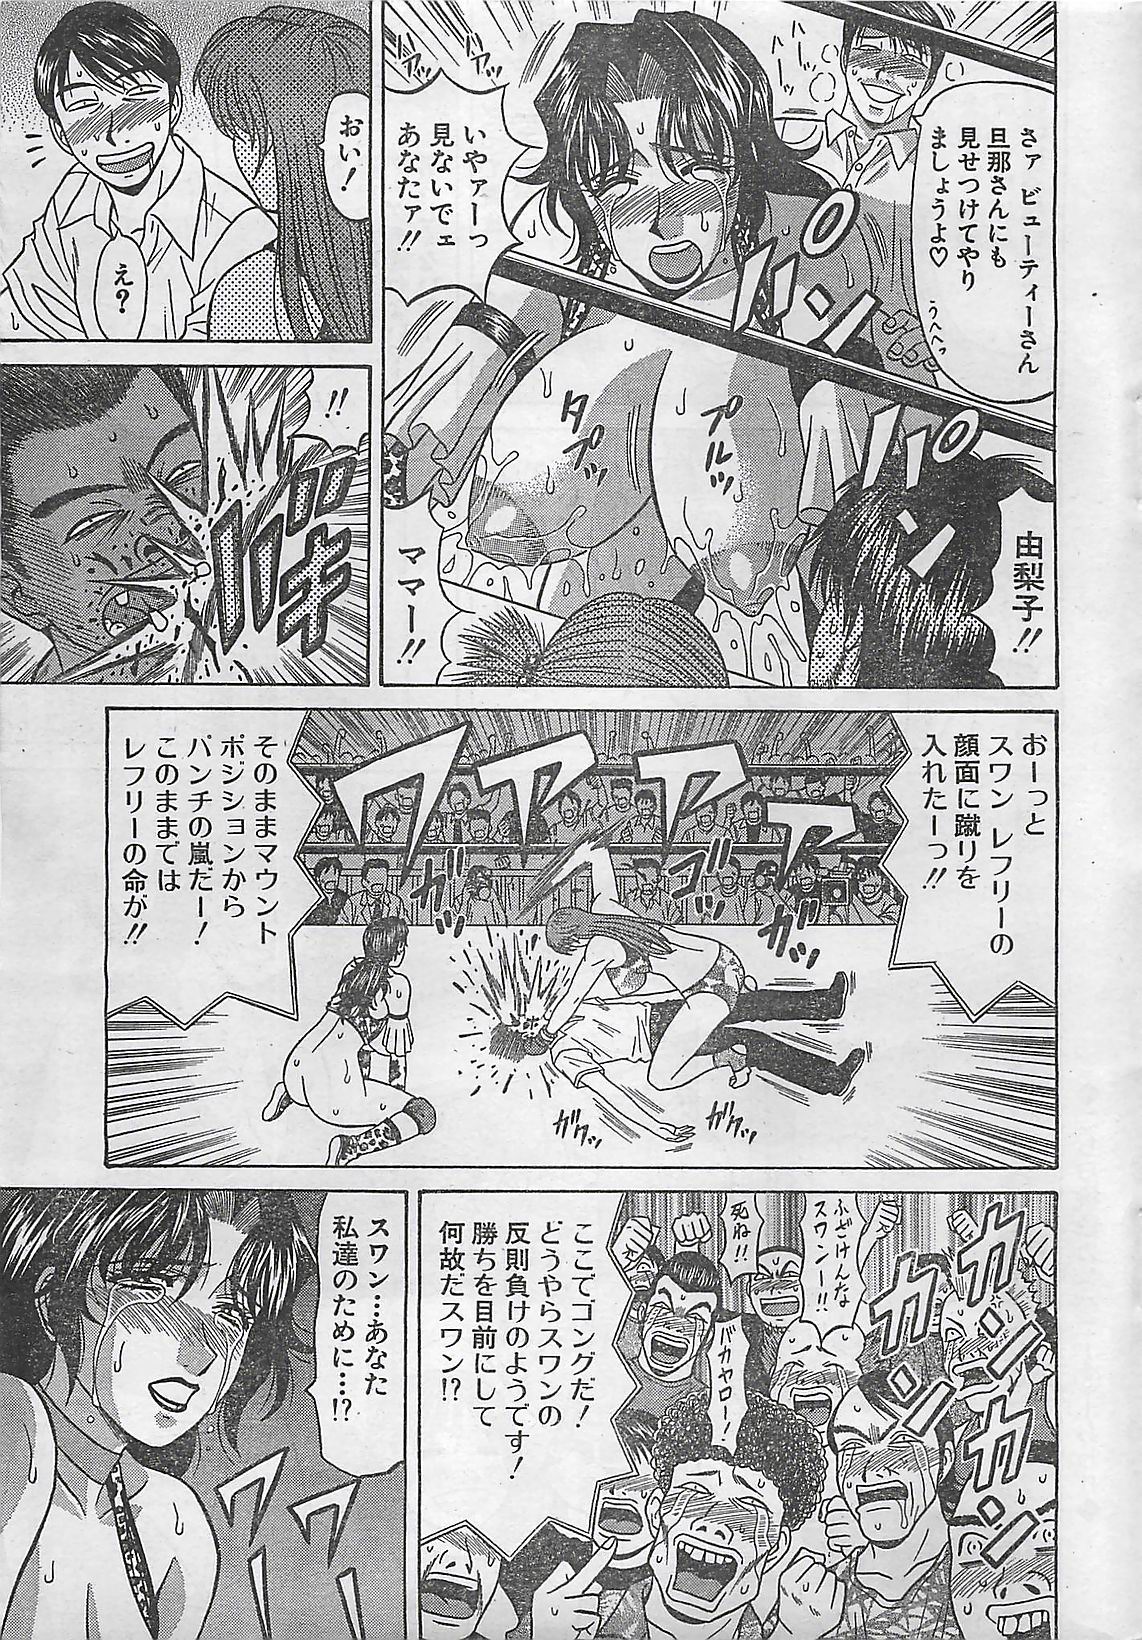 Action Pizazz 2003-09 page 21 full